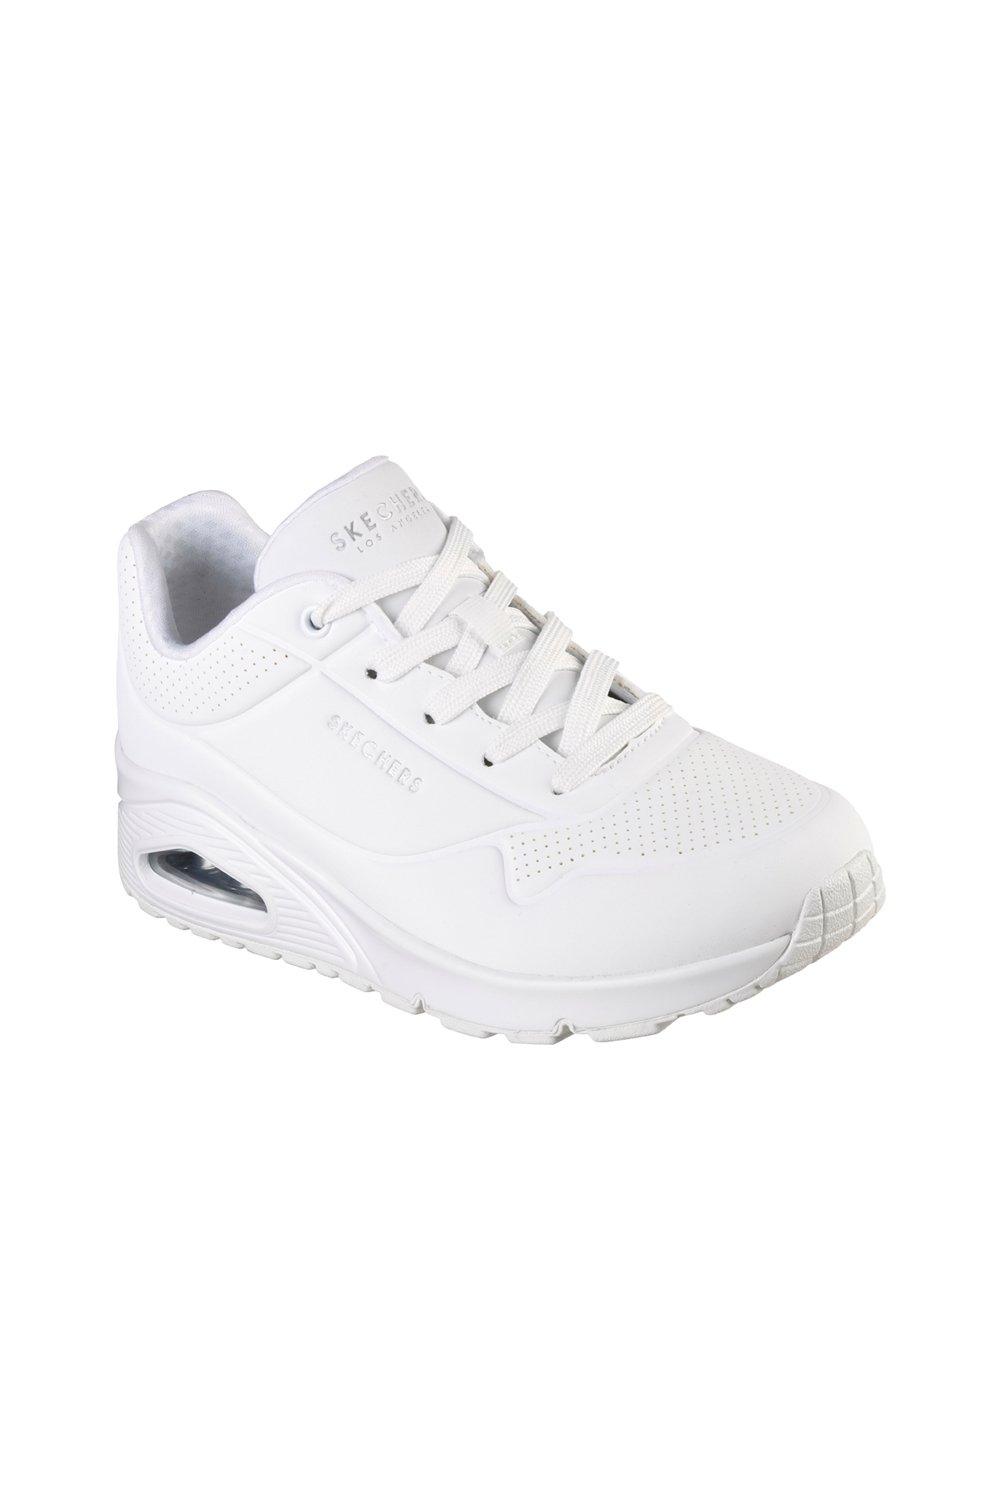 Кроссовки Uno - Stand On Air Trainers Debenhams, белый кроссовки uno stand on air trainers debenhams мультиколор